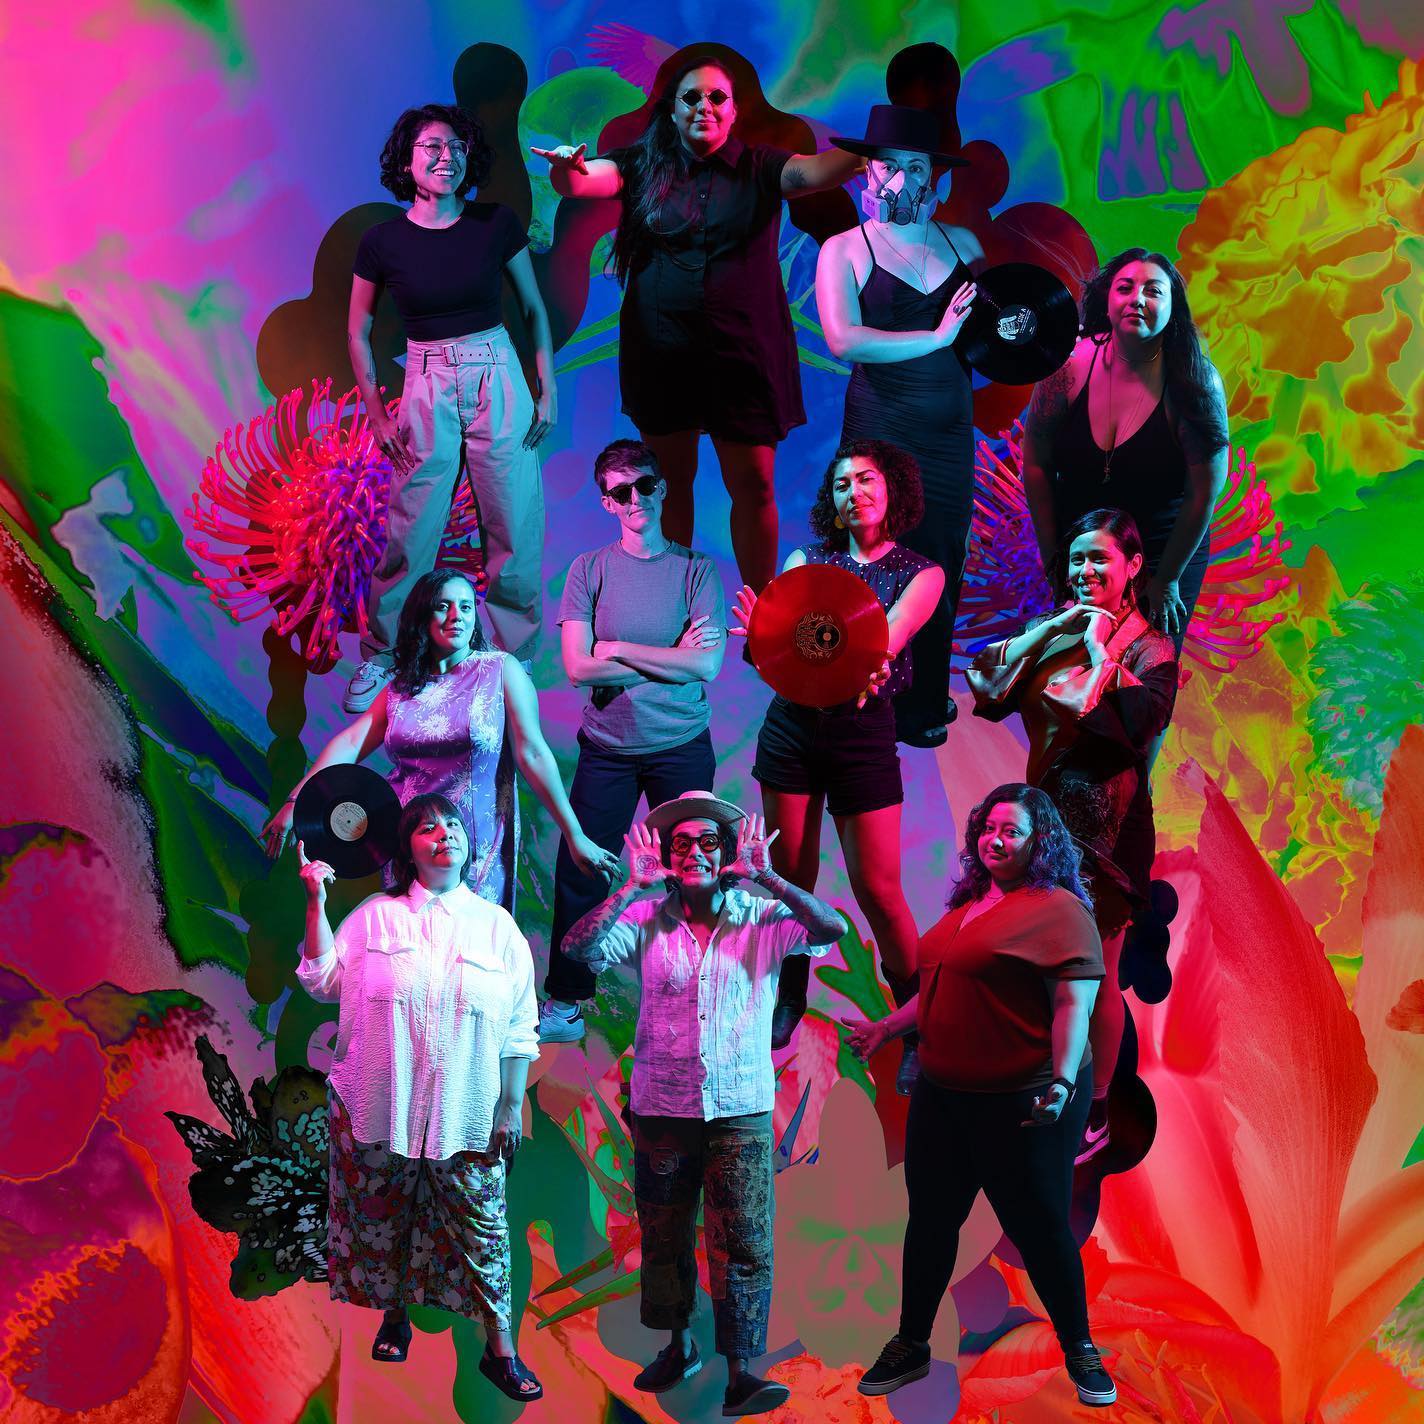 11 different people standing in a group with a colorful graphic background. Some of them are holding vinyl records